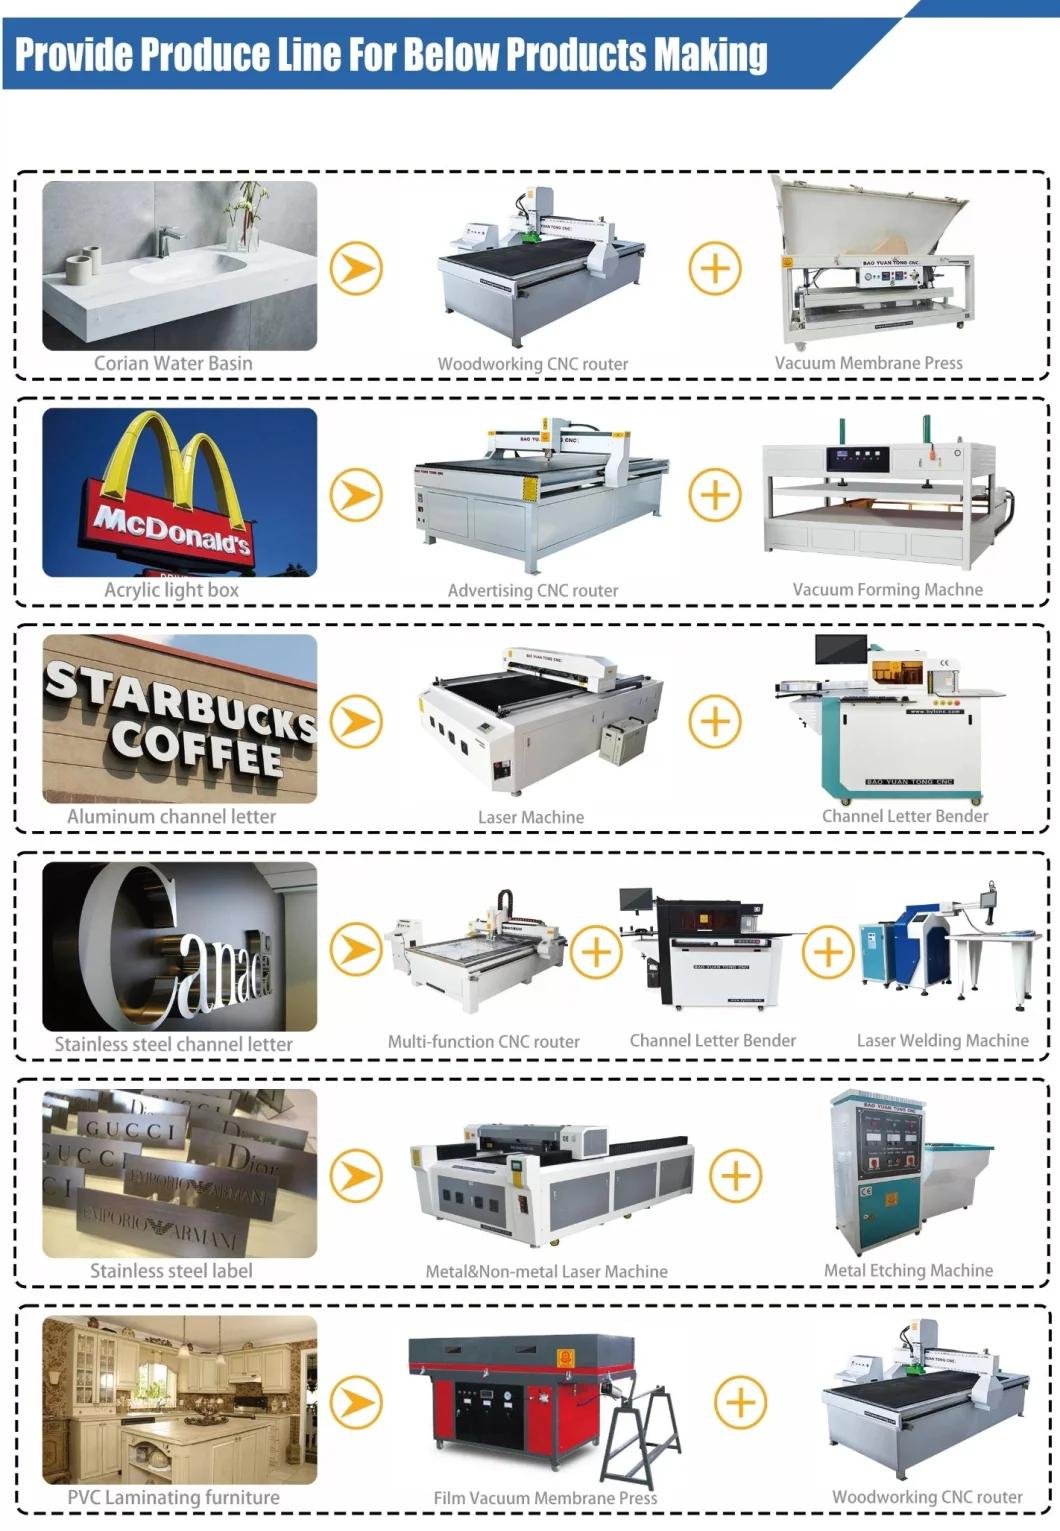 Bsx-1200 Factory Direct Plastic Vacuum Thermal Vacuum Forming Machine with Long Service Life